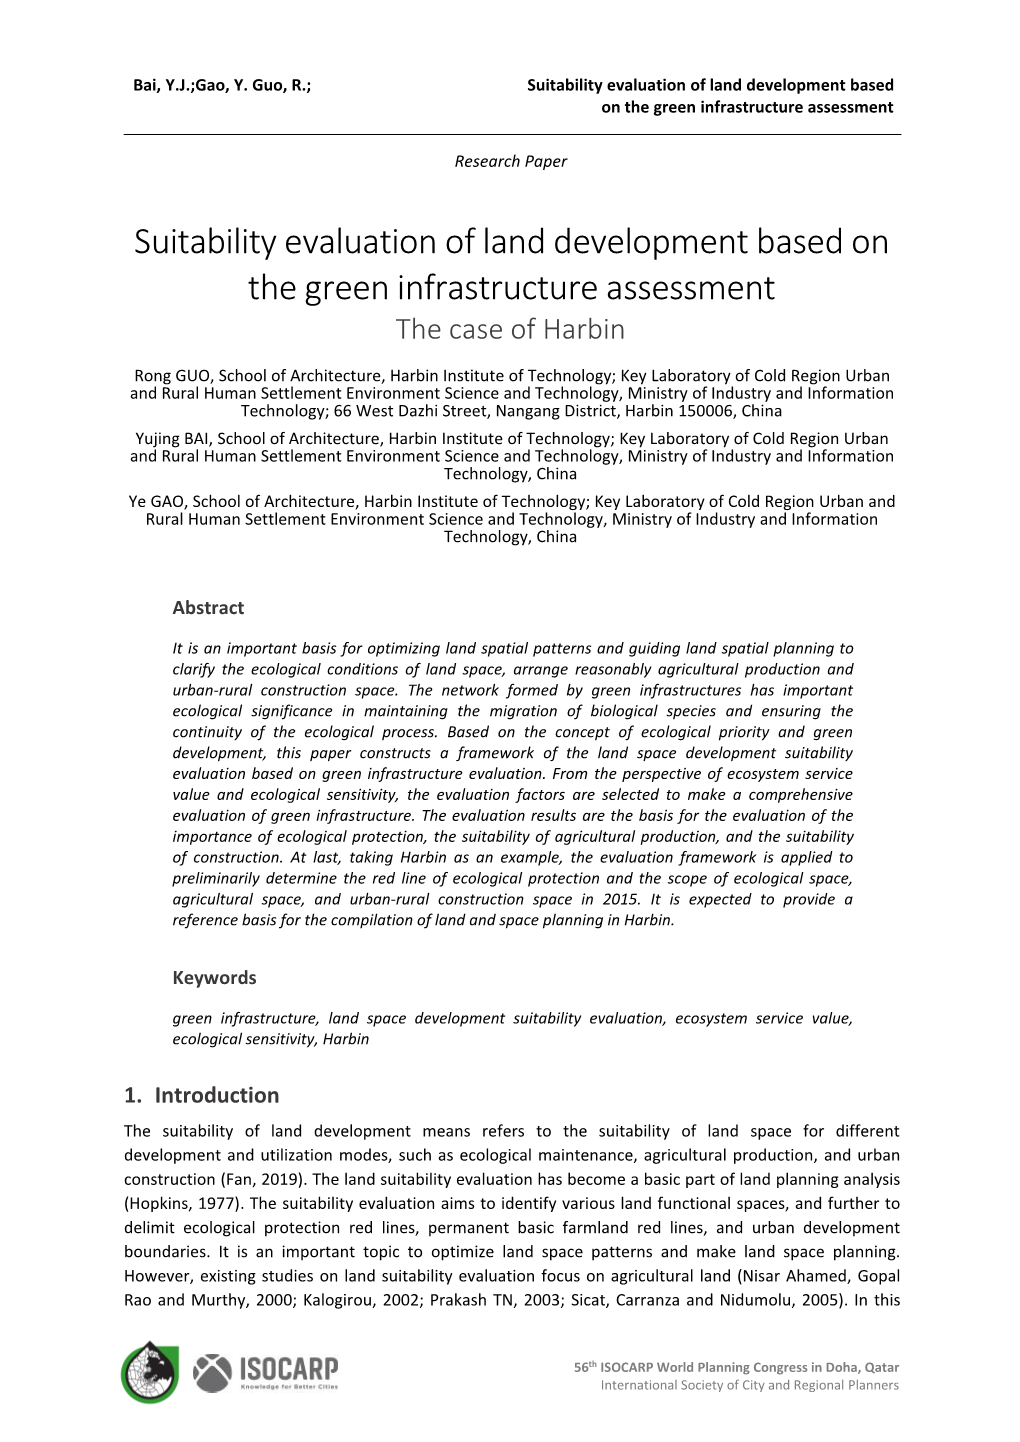 Suitability Evaluation of Land Development Based on the Green Infrastructure Assessment